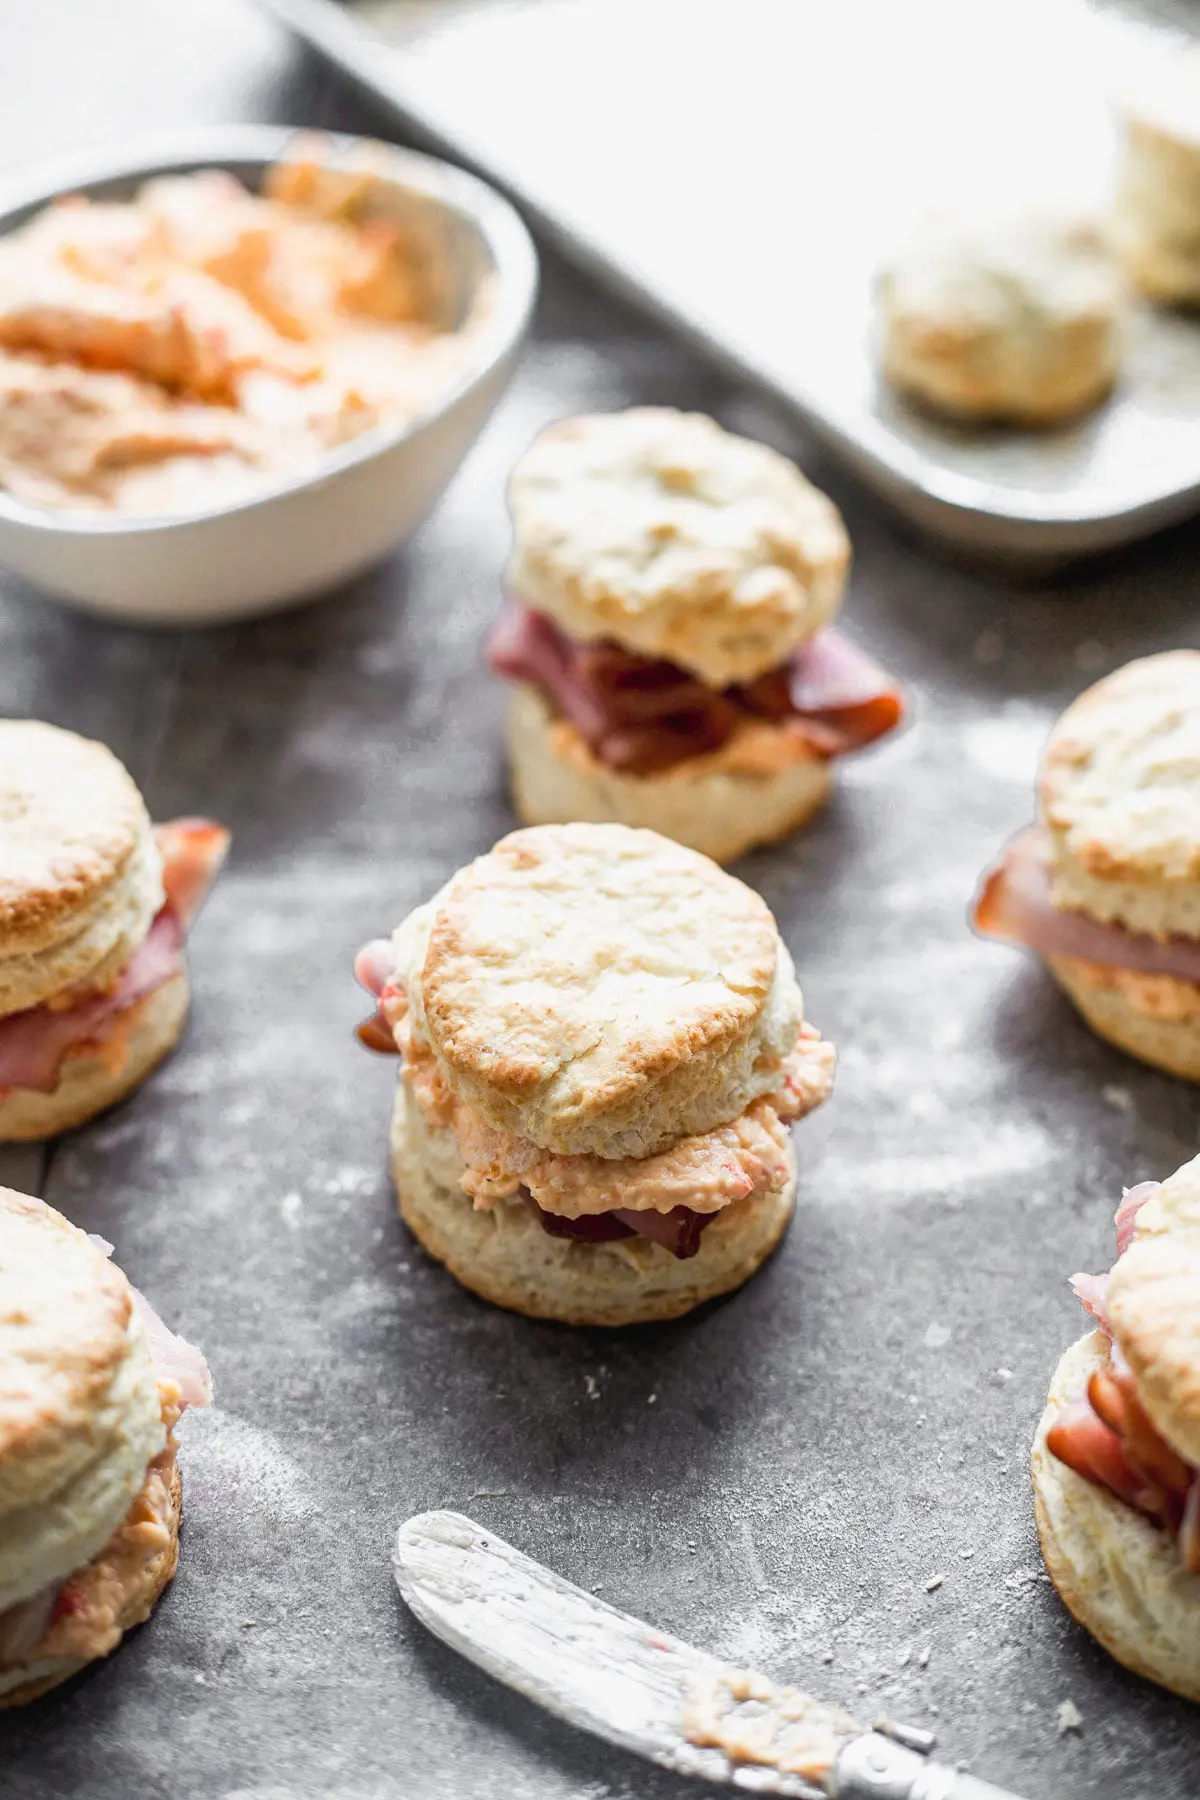 These Ham &amp; Pimento Cheese Sandwiches are simple, but bursting with flavor. We take our favorite biscuit recipe that's light, flaky, and oh-so delicious and smother the inside with warm pimento cheese and ham. The perfect bridal shower, lunch or side to soup or salad.